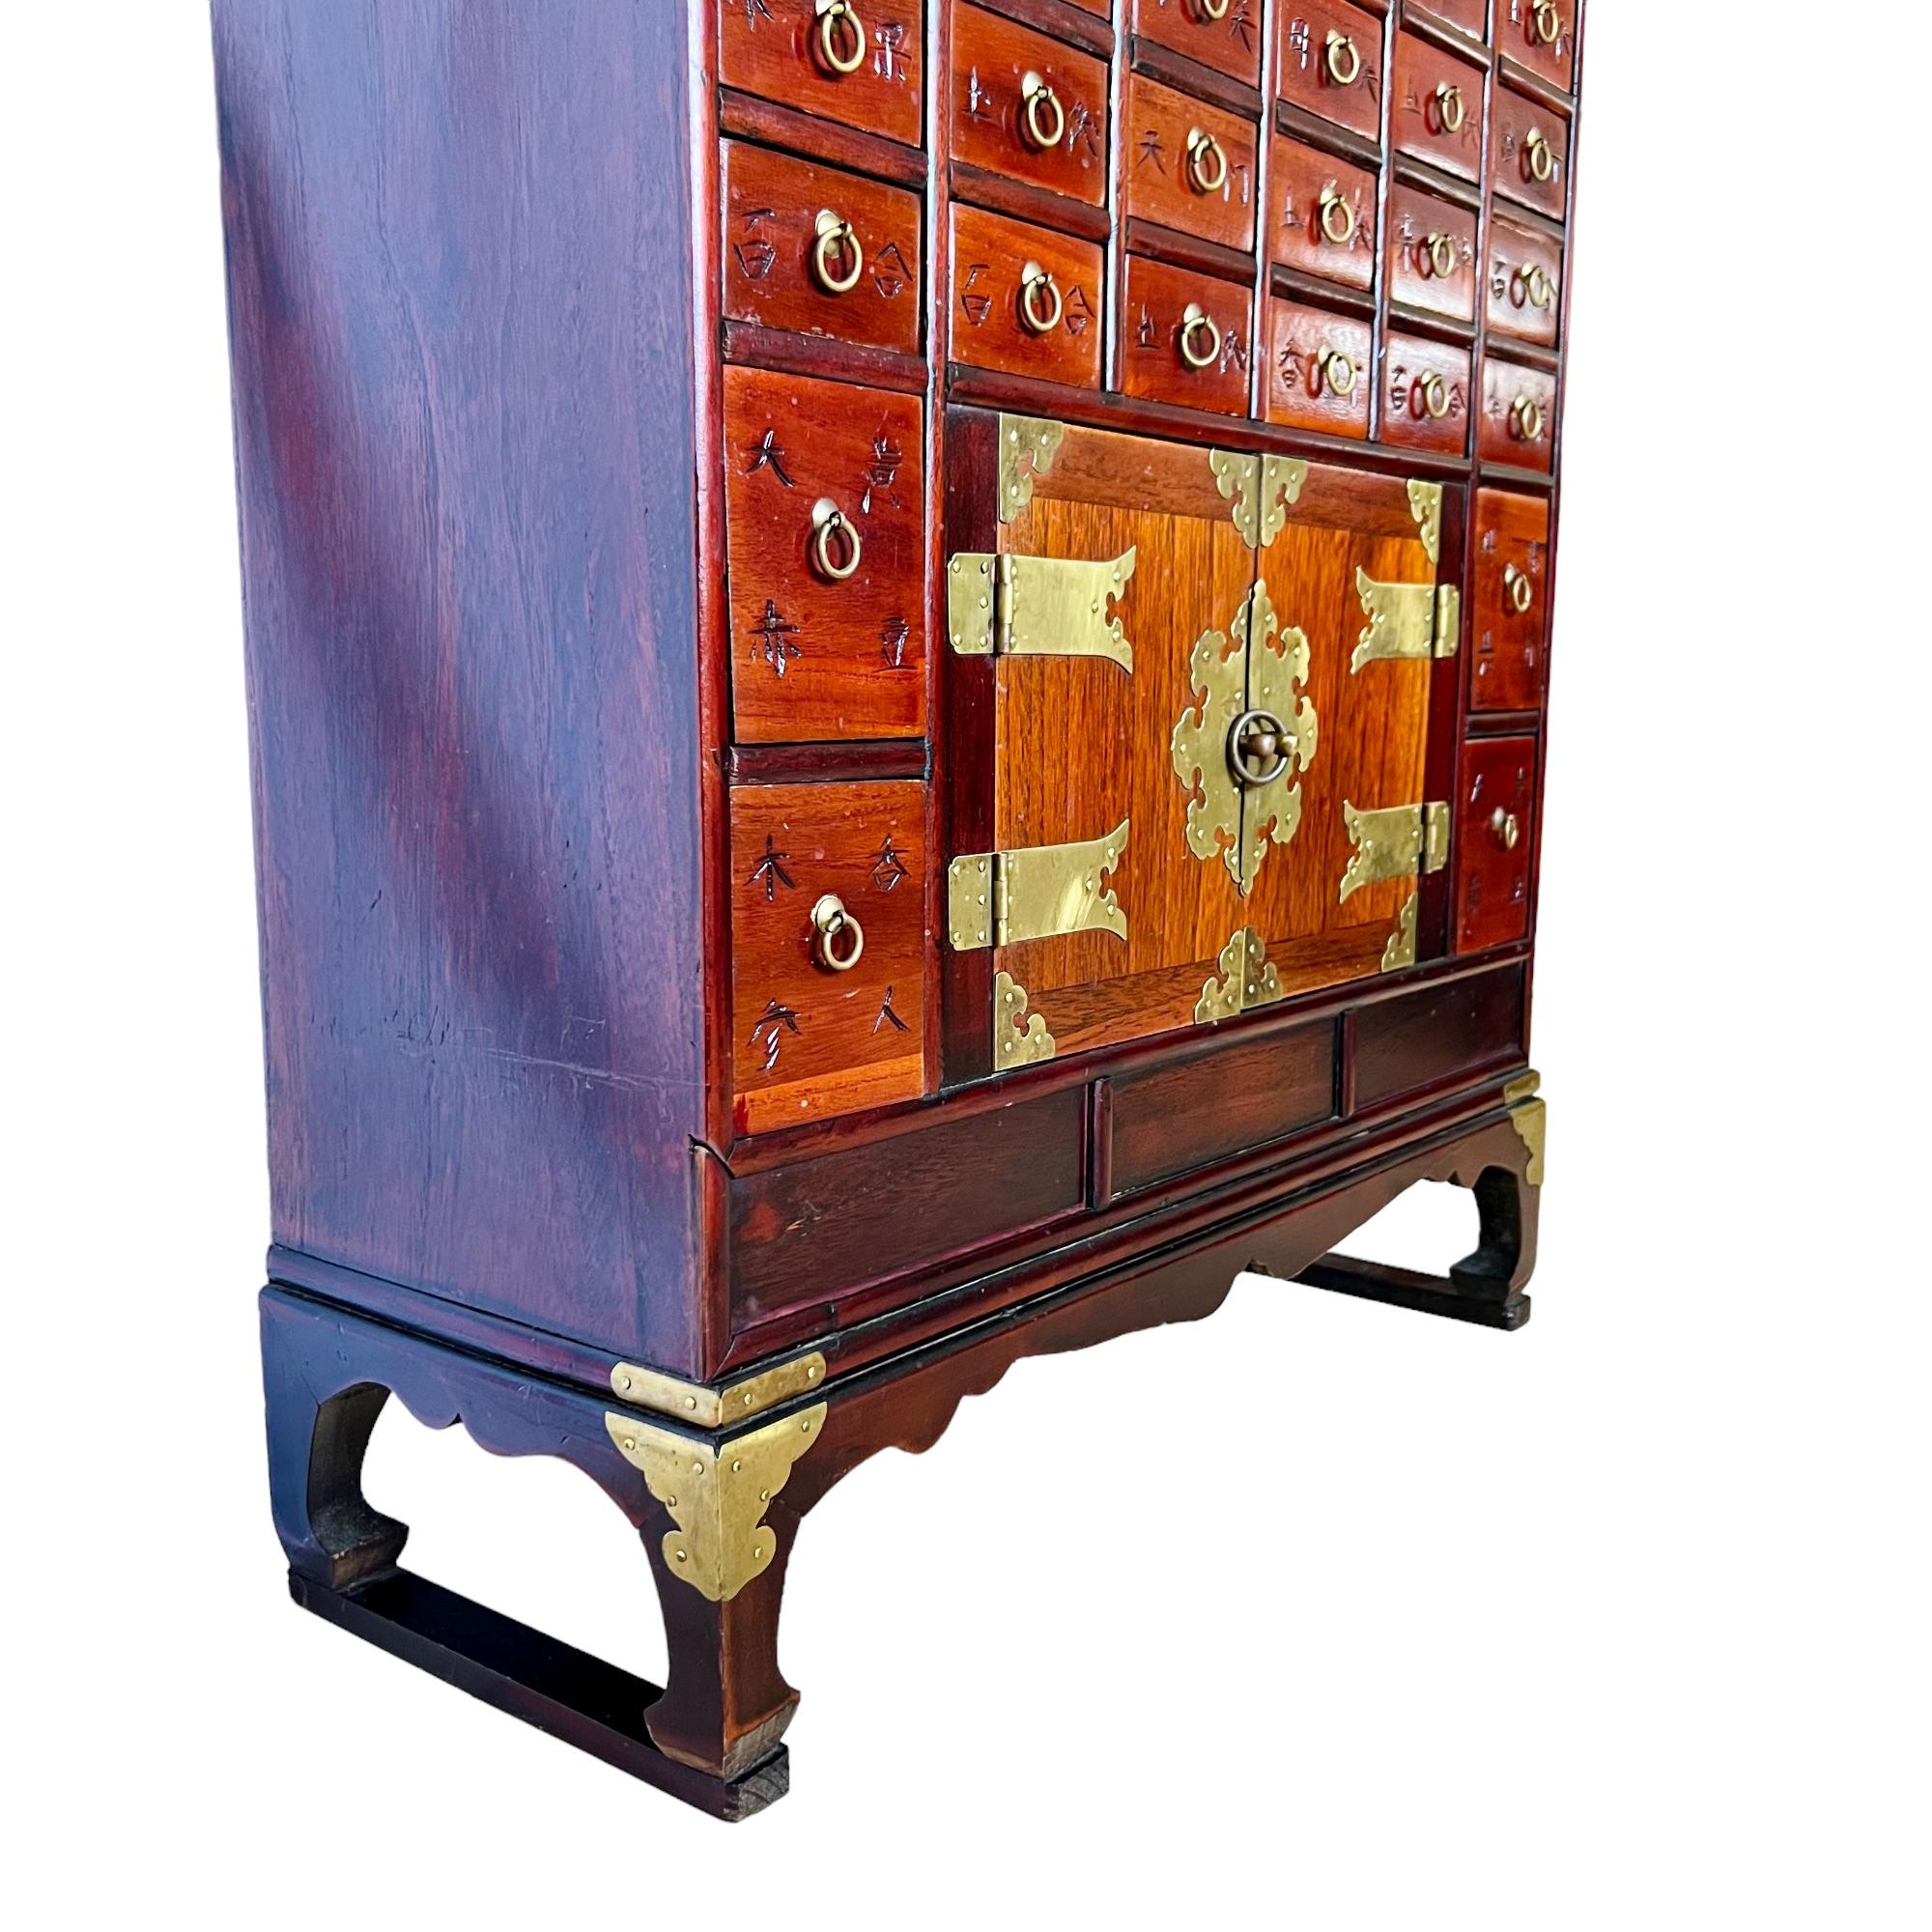 Chinese Lingerie Chest and Korean Apothecary Cabinet, a Set 10